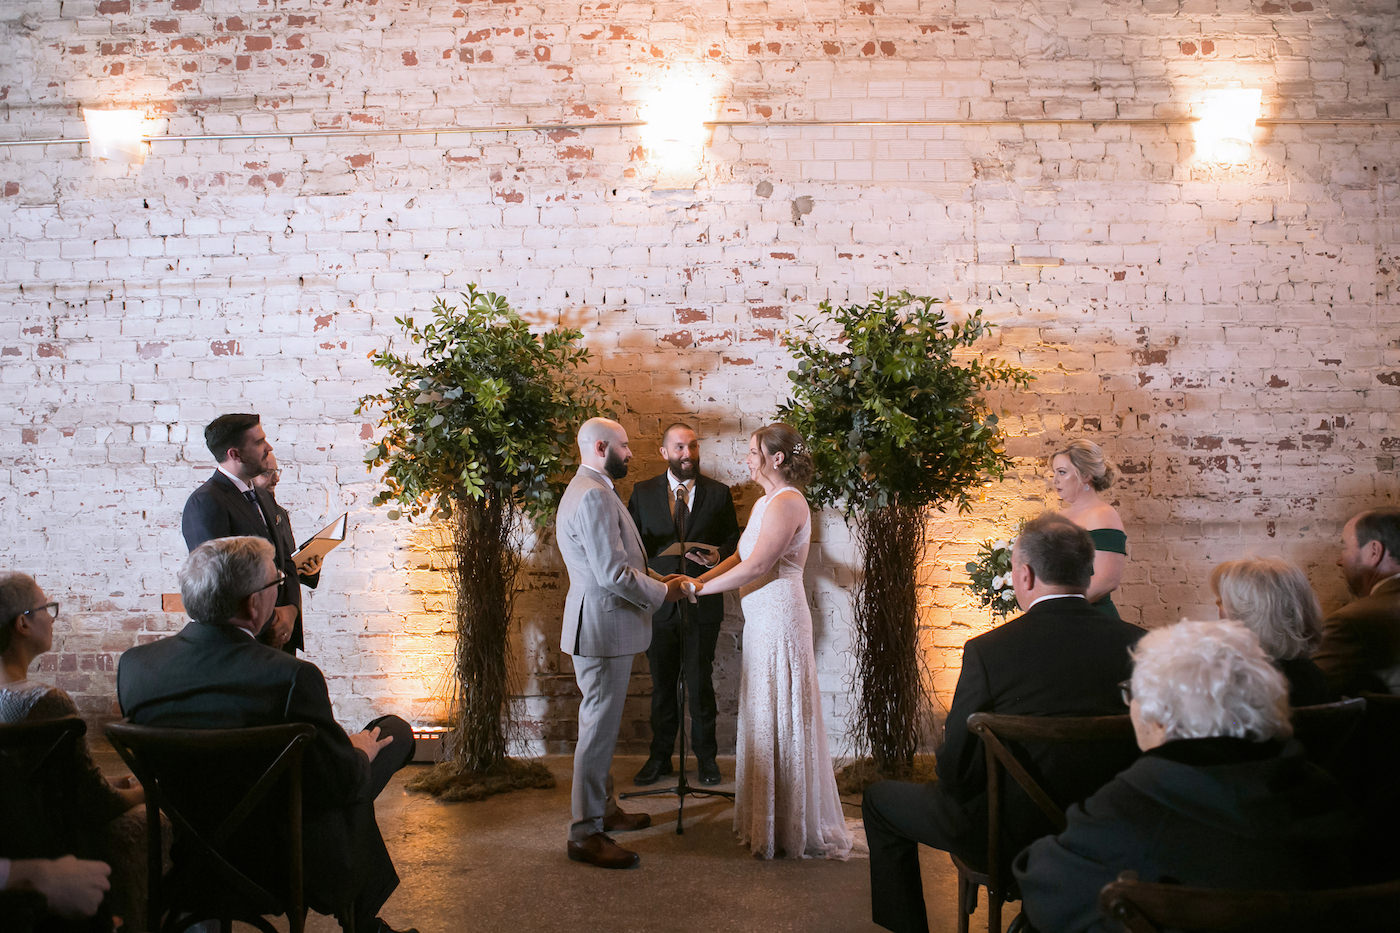 Unique Wes Anderson Ceremony Decor, Curly Willow Trees, Uplighting, White Brick Wall | Wedding Photographer Carrie Wildes Photography | Tampa Bay Wedding Venue Rialto Theatre | Wedding Florist Monarch Events and Design | Wedding Planner UNIQUE Weddings and Events